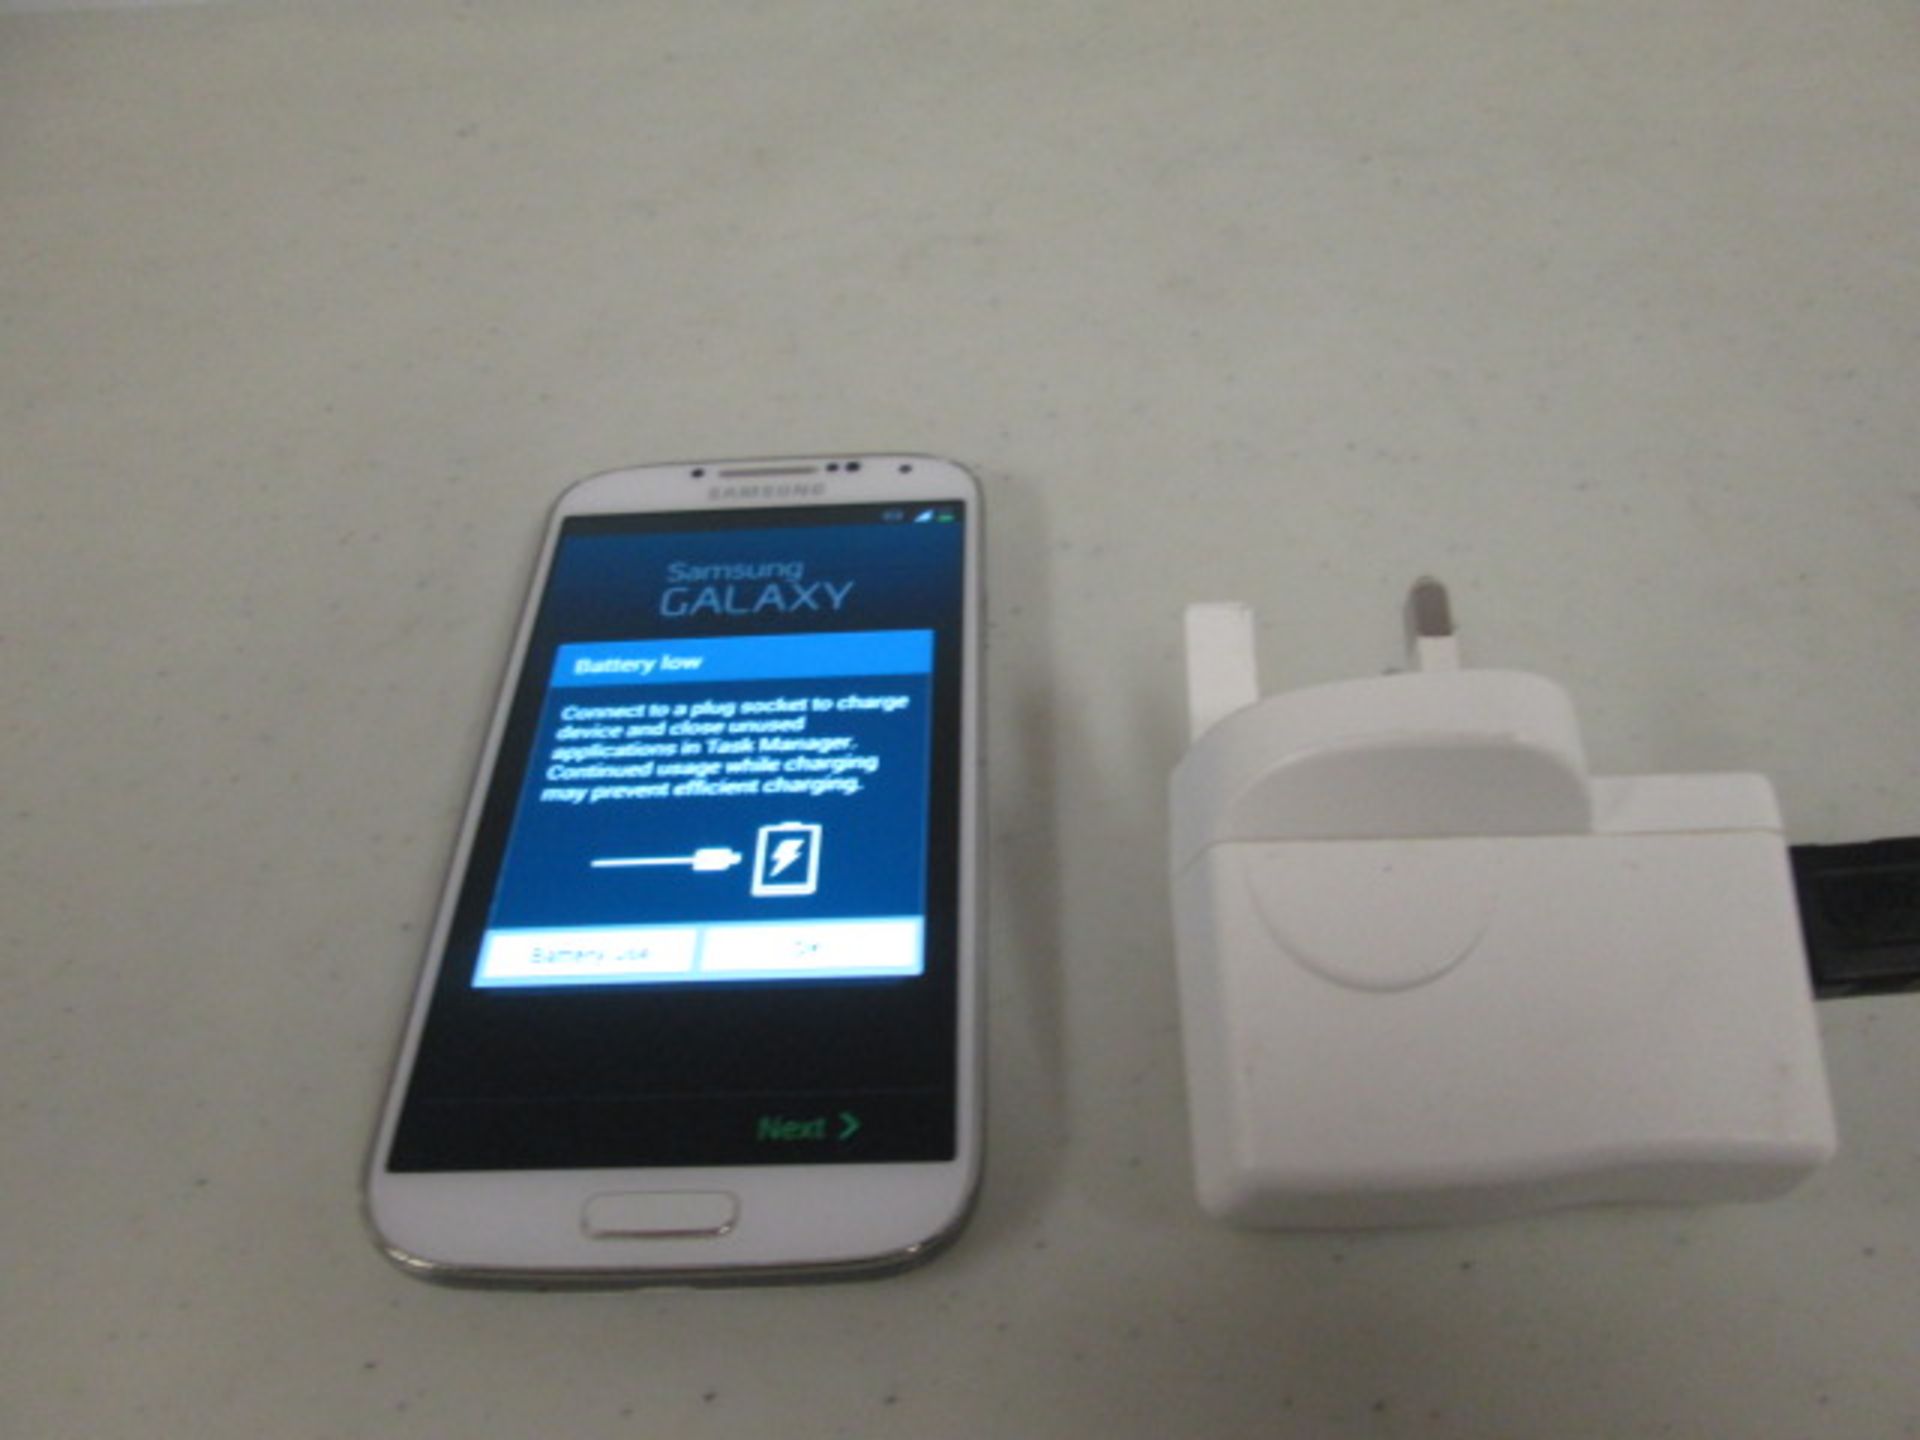 Samsung Galaxy S4 Mobile Phone, Model GT-19505, 16GB. Colour White. Comes with Charger. Locked to - Image 6 of 6